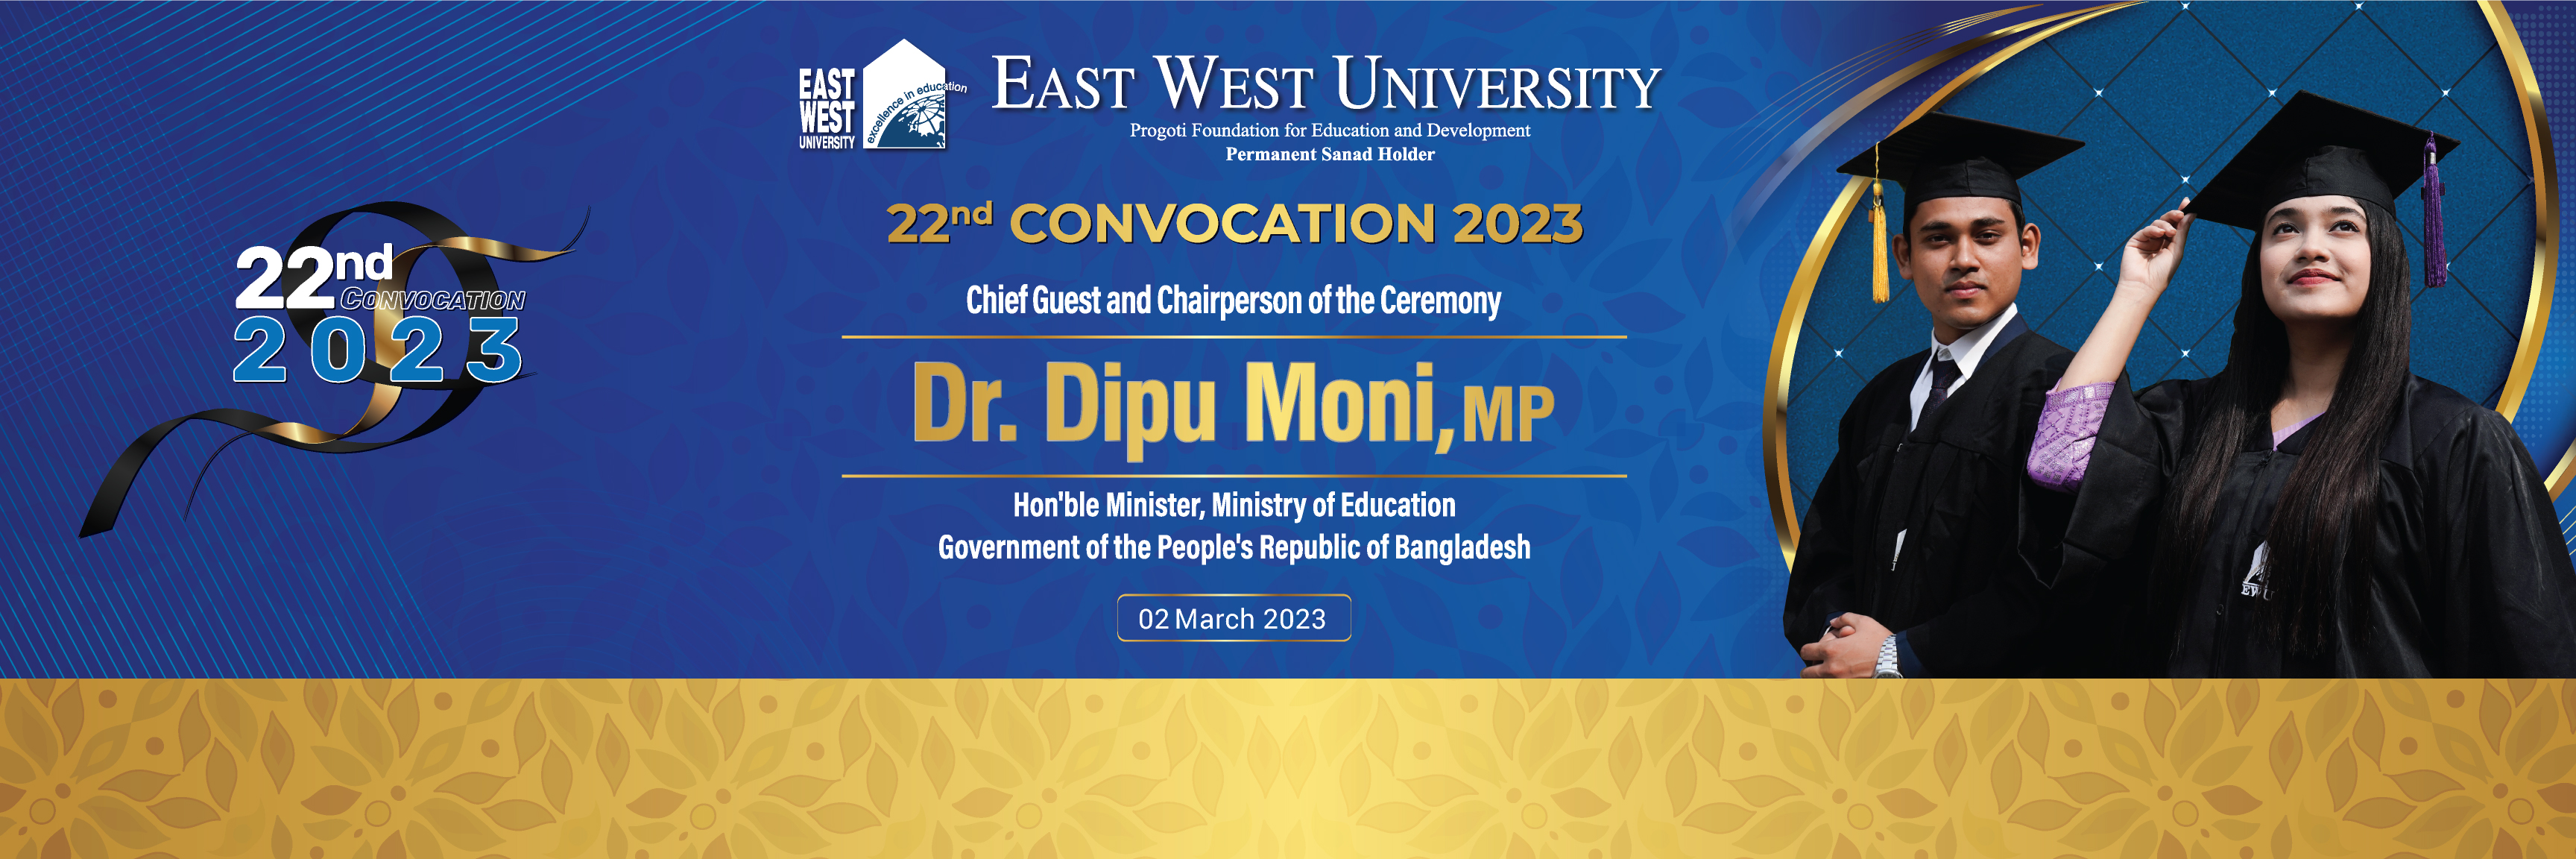 22nd CONVOCATION 2023, EAST WEST UNIVERSITY